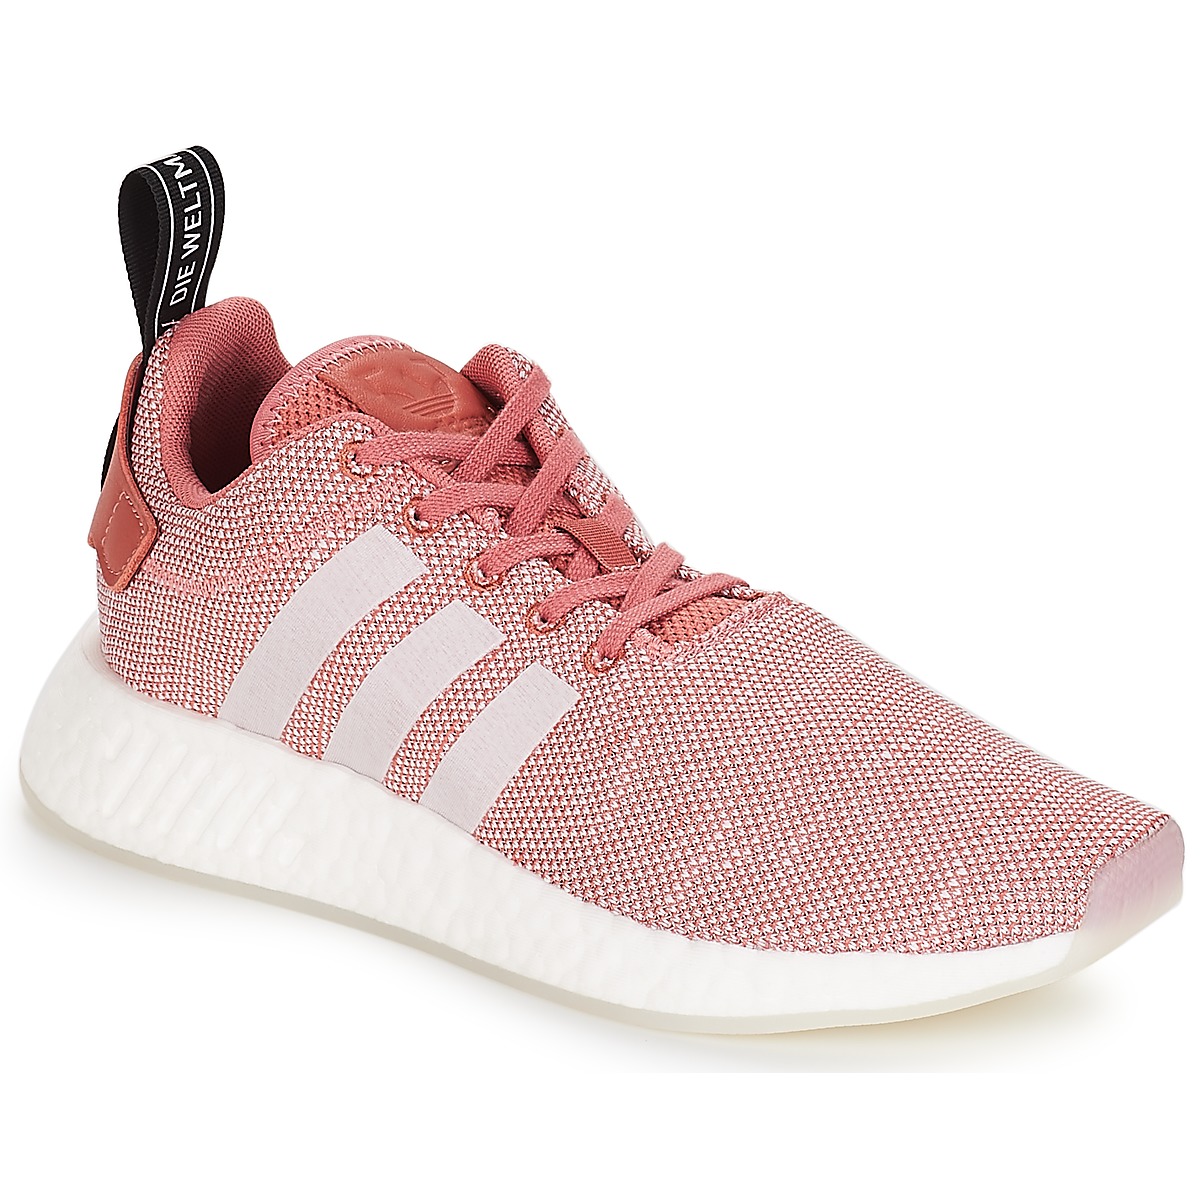 adidas Originals NMD R2 W Pink - Free delivery | Spartoo NET ! - Shoes Low  top trainers Women USD/$130.80